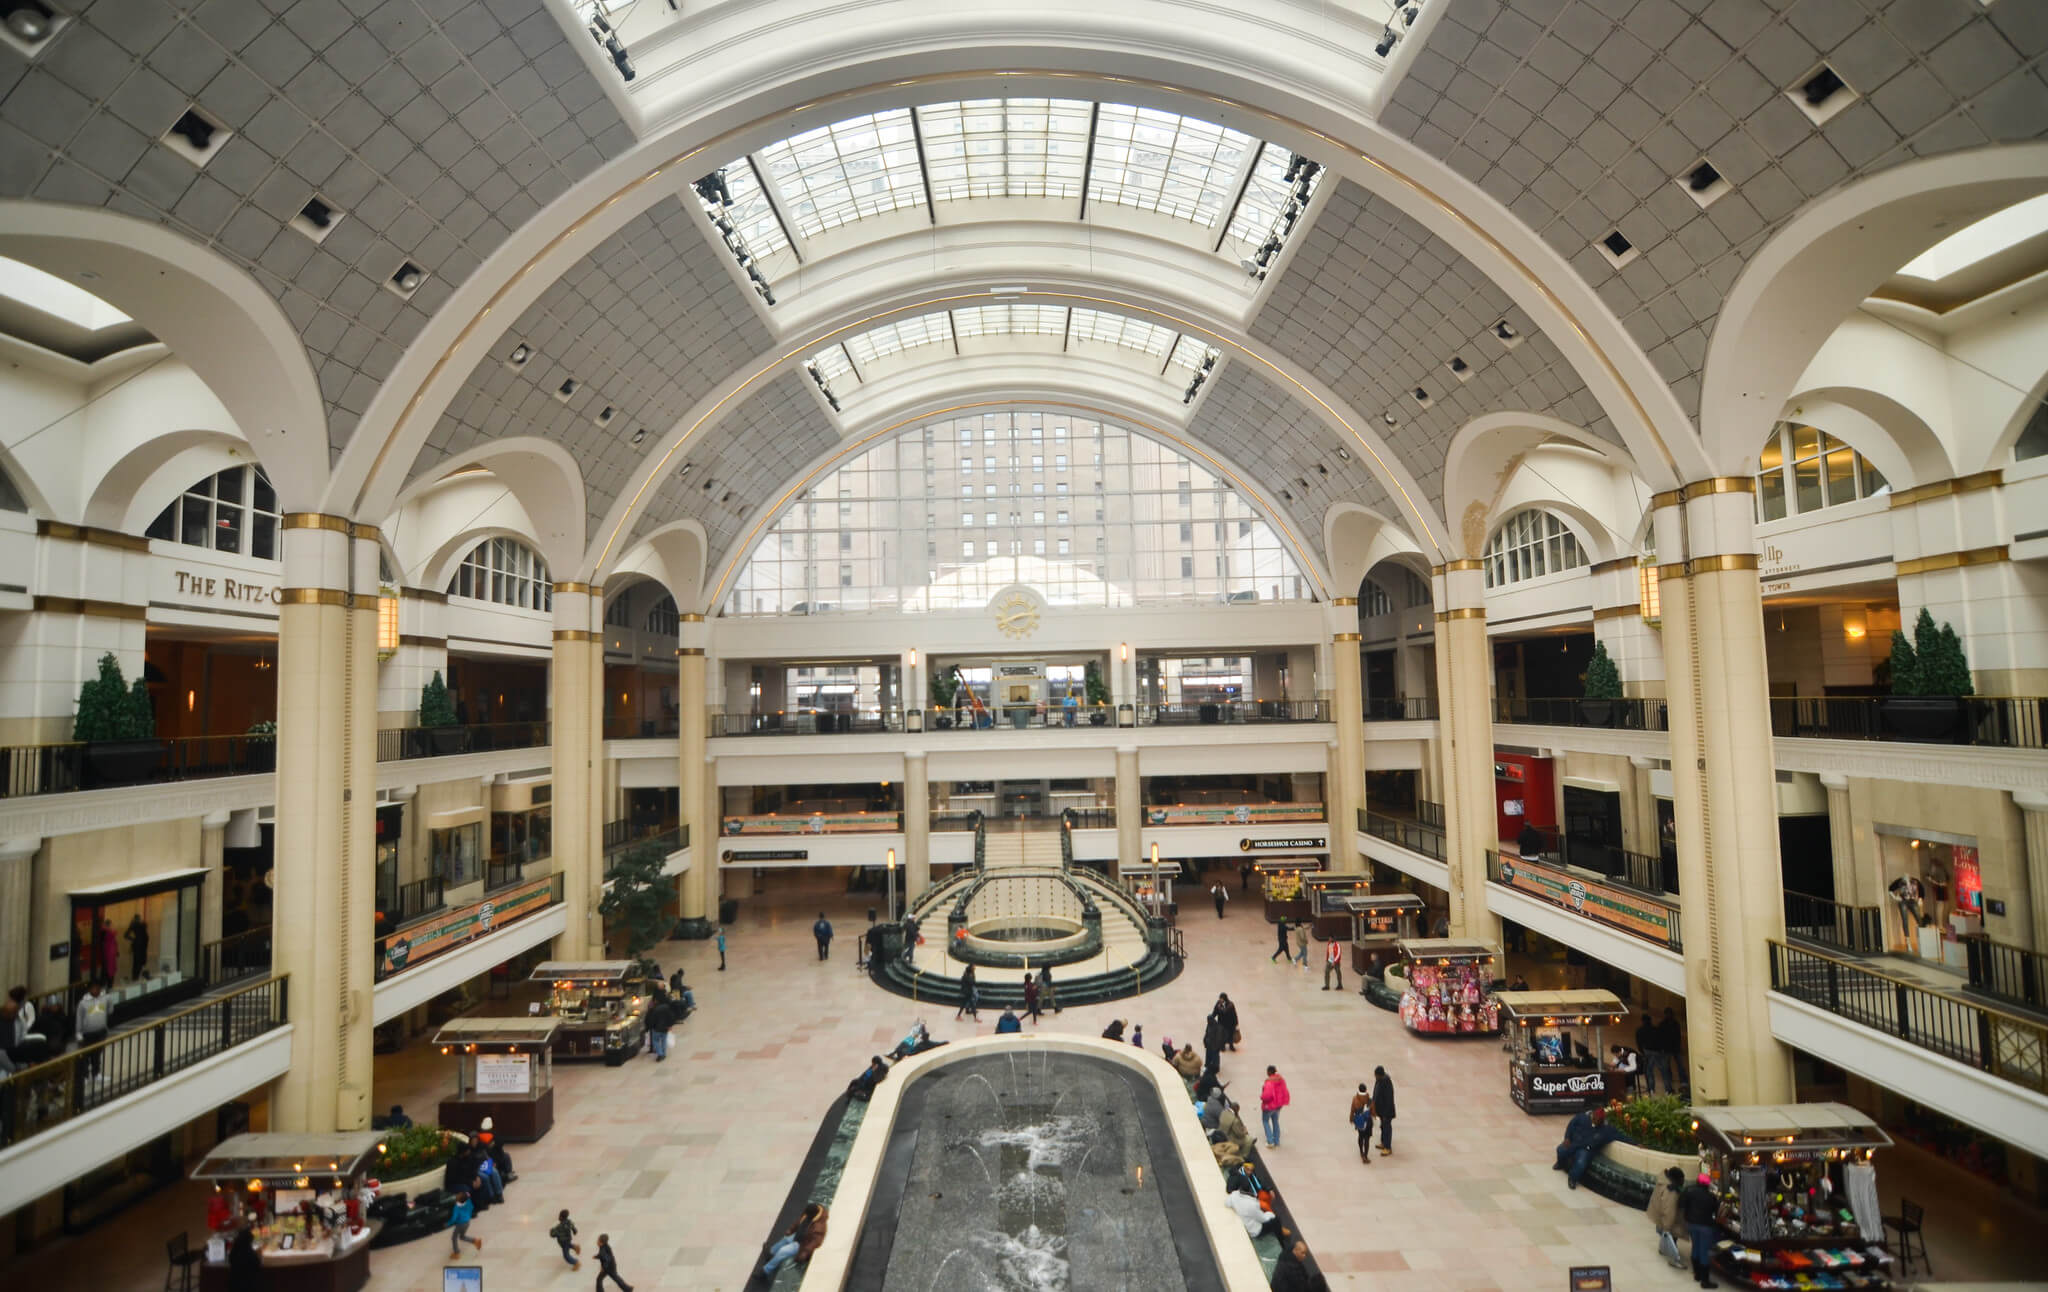 view of a historic train hall converted into amall